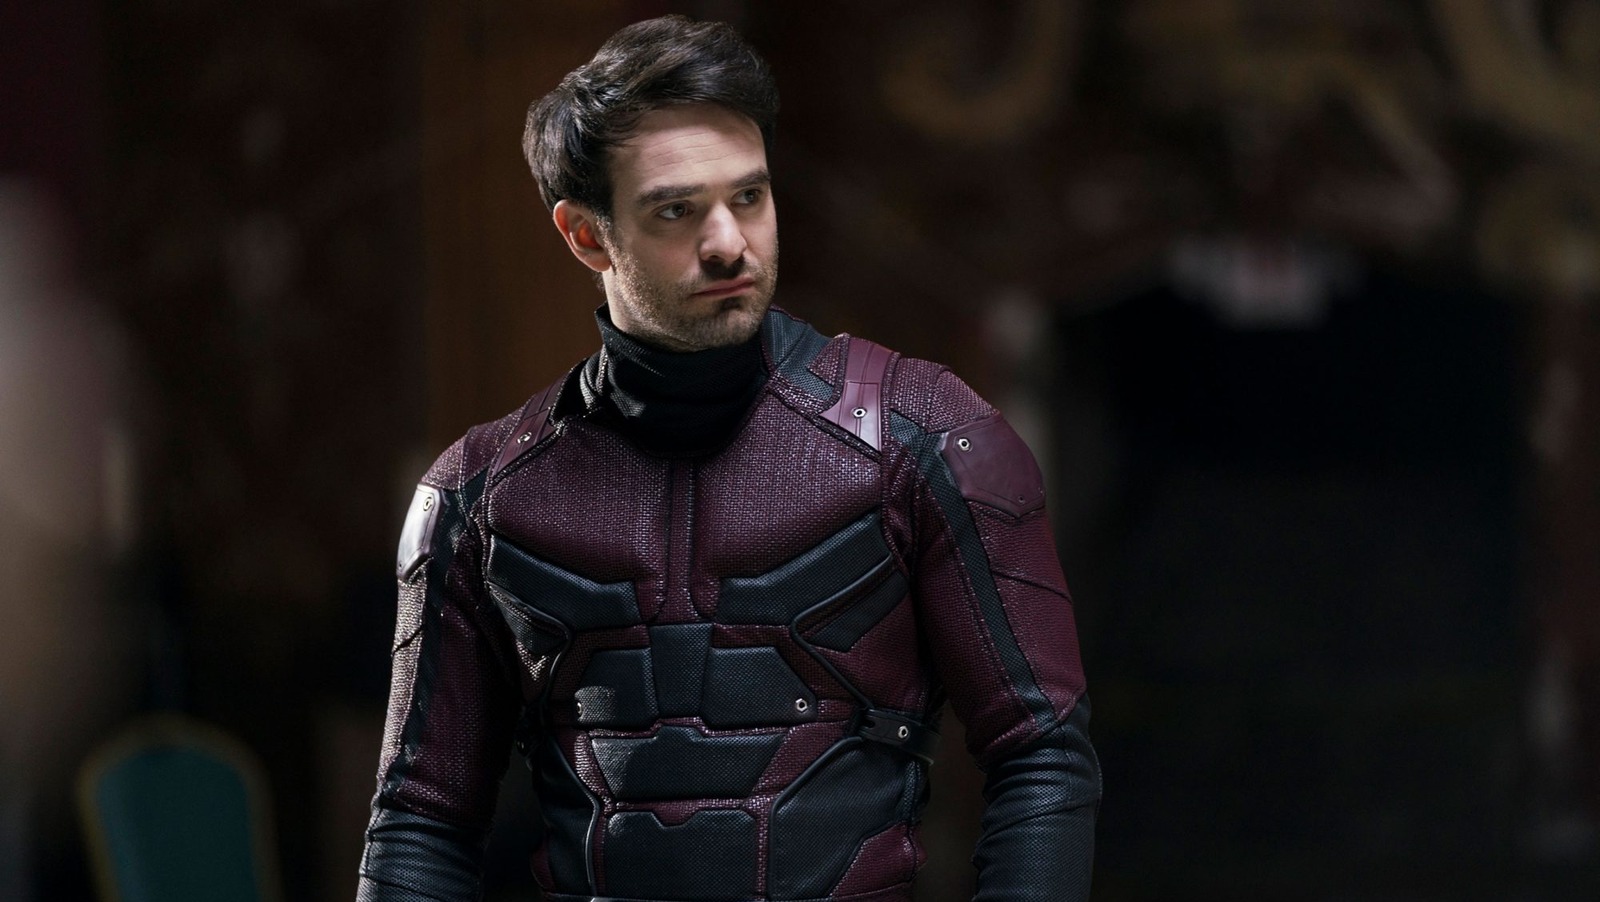 Daredevil: Born Again Disney+ Series Will Bring Back Charlie Cox As The Man Without Fear [Comic-Con]